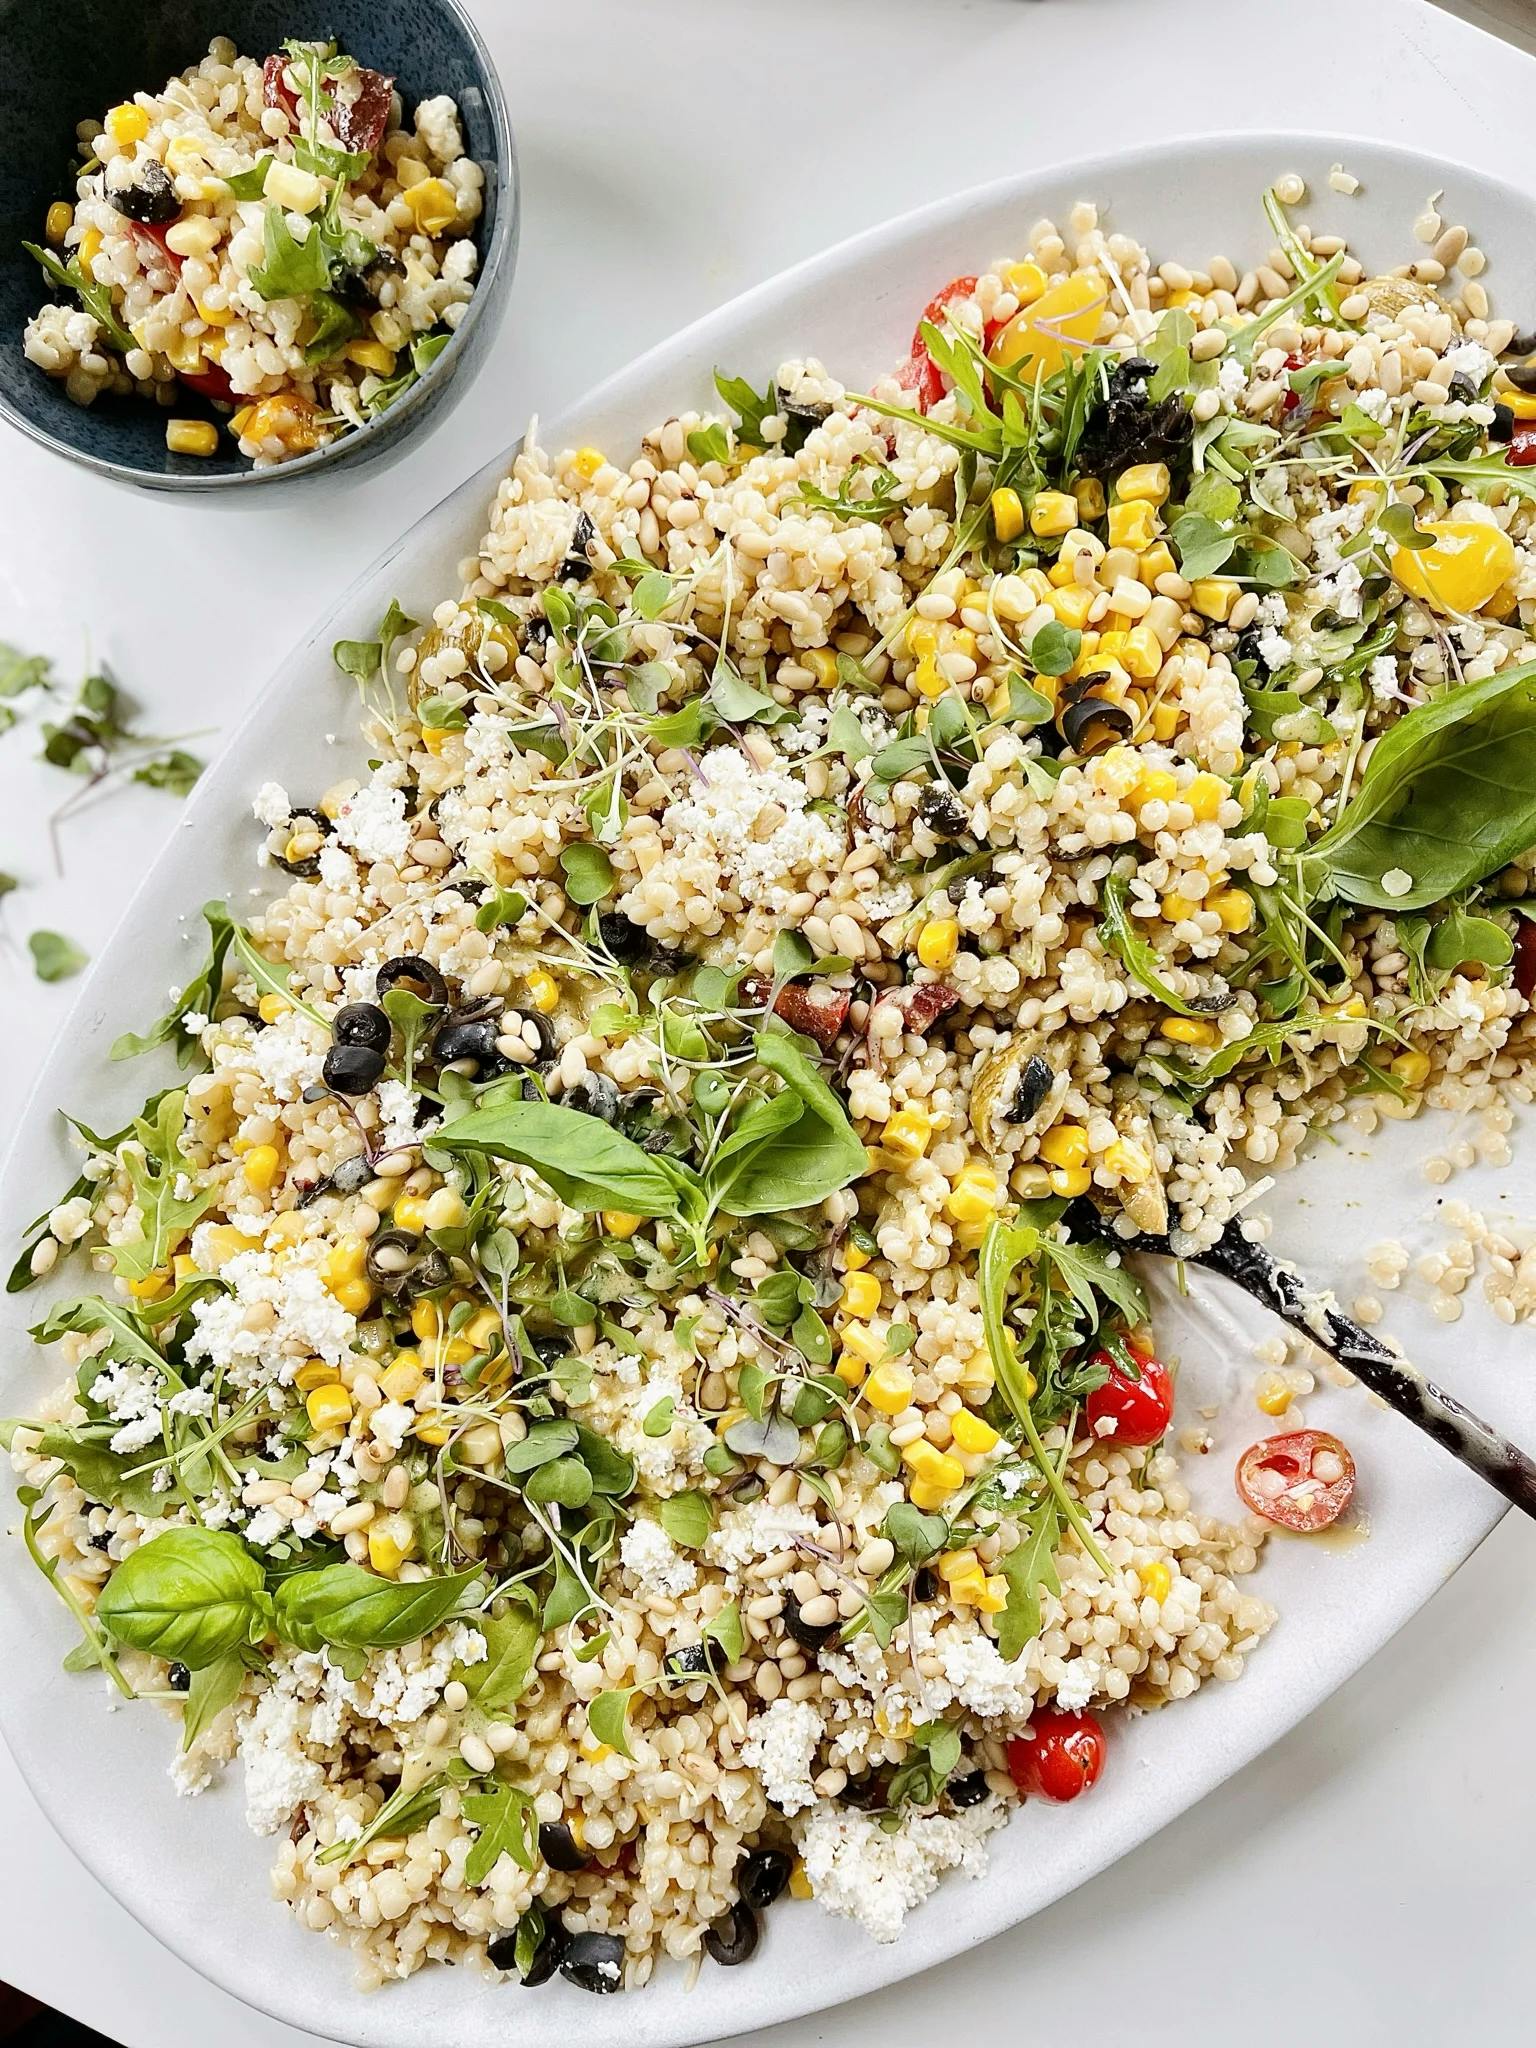 Picture for Feta & Corn Couscous Pasta Salad with Arugula & Grilled Green Olives